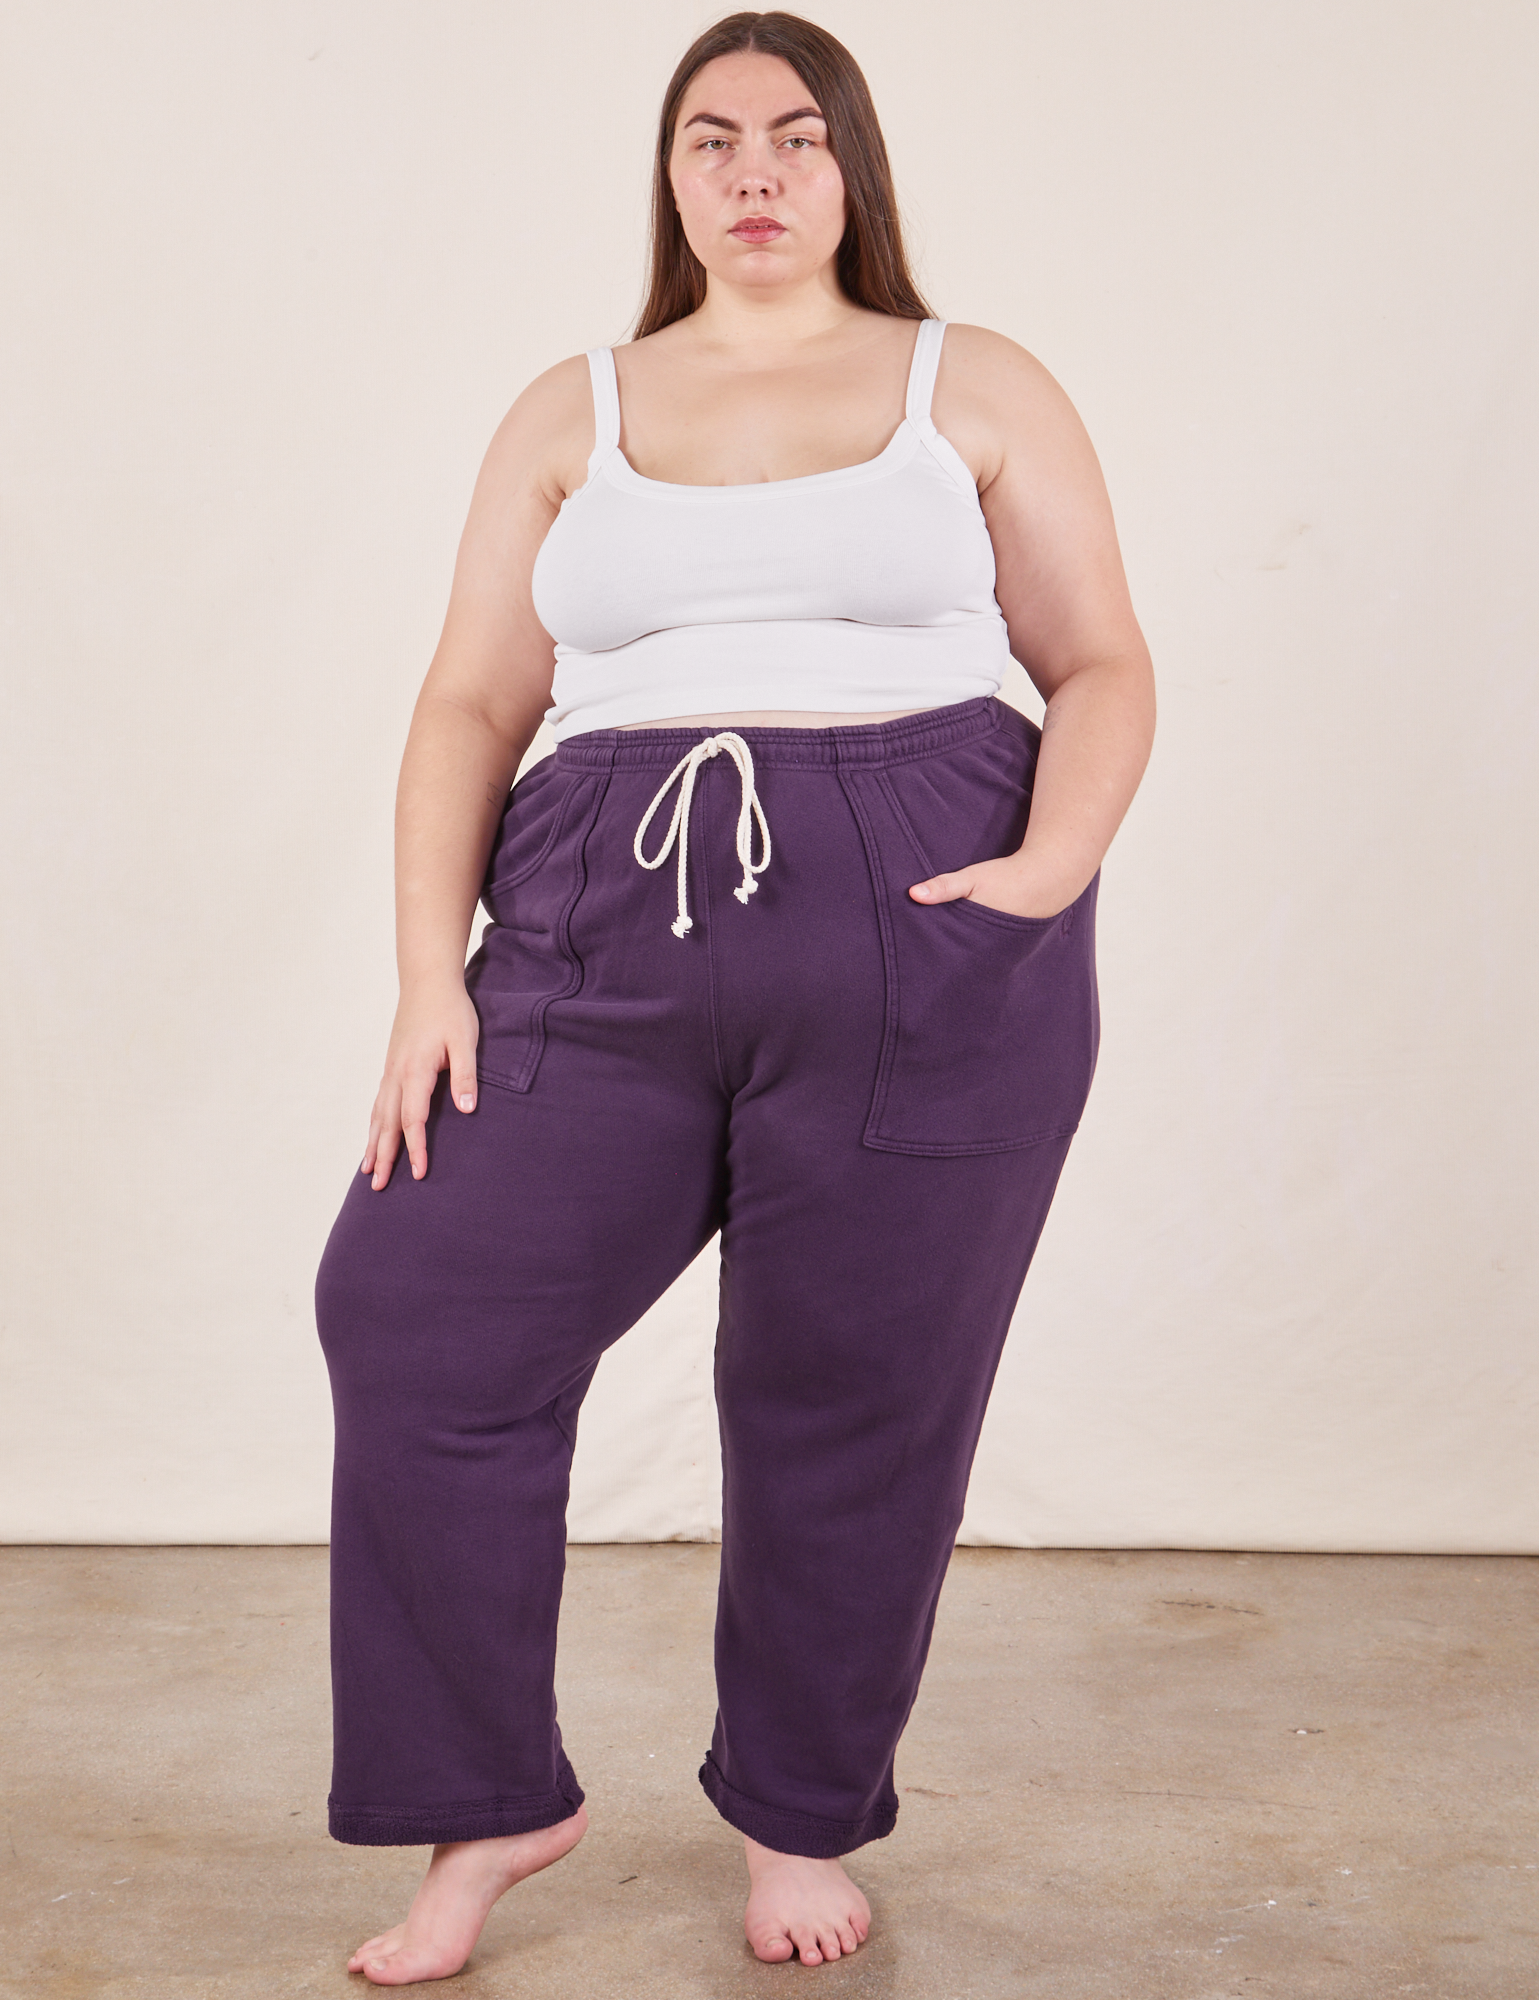 Marielena is 5&#39;8&quot; and wearing 2XL Cropped Rolled Cuff Sweatpants in Nebula Purple paired with vintage off-white Cami